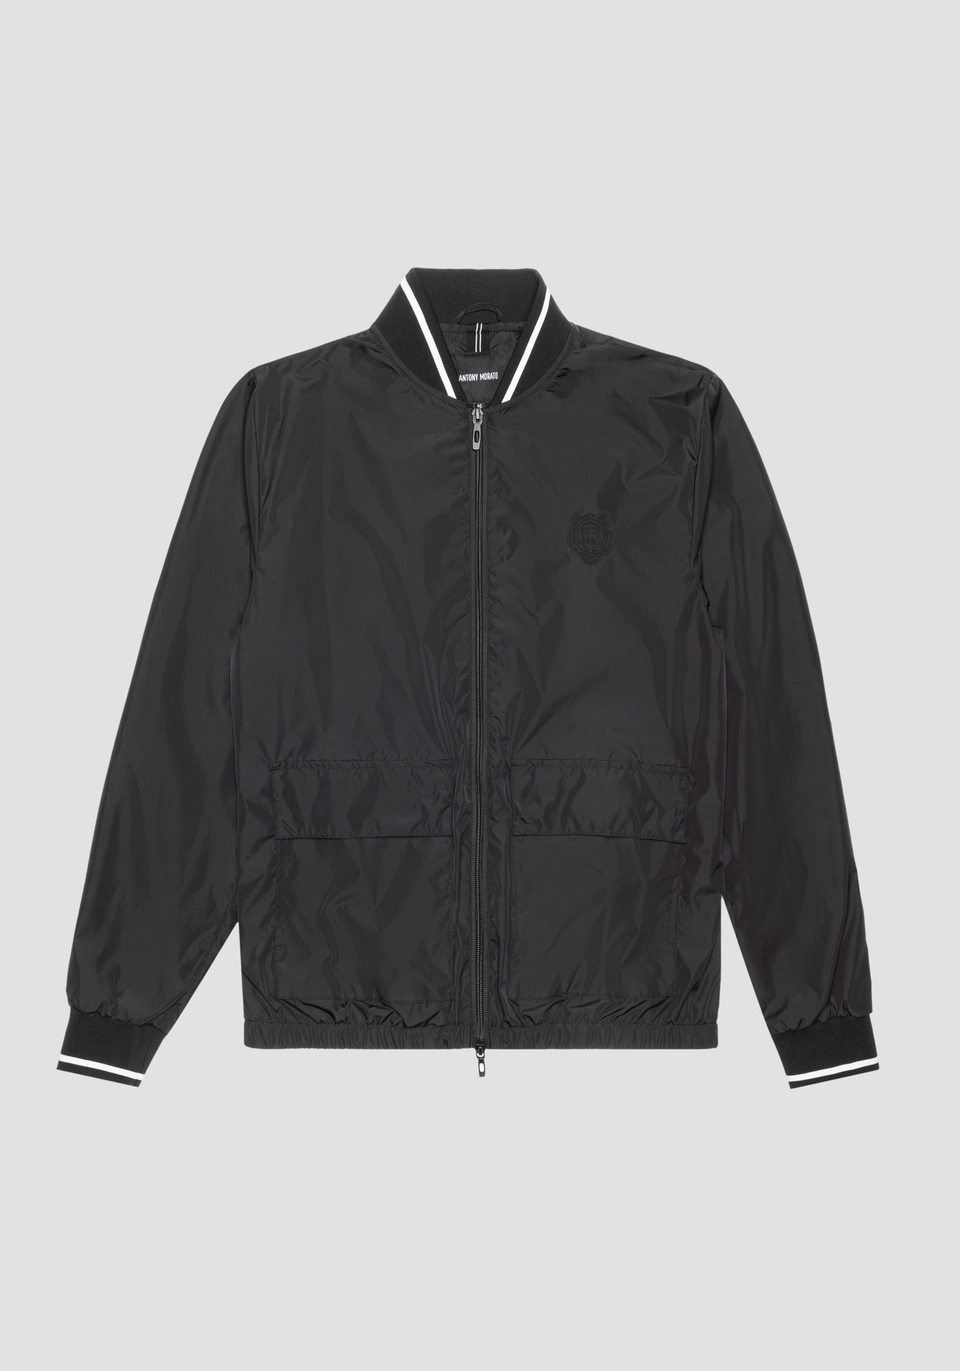 REGULAR FIT JACKET IN TECHNICAL FABRIC WITH RUBBER INJECTION PRINT - Antony Morato Online Shop